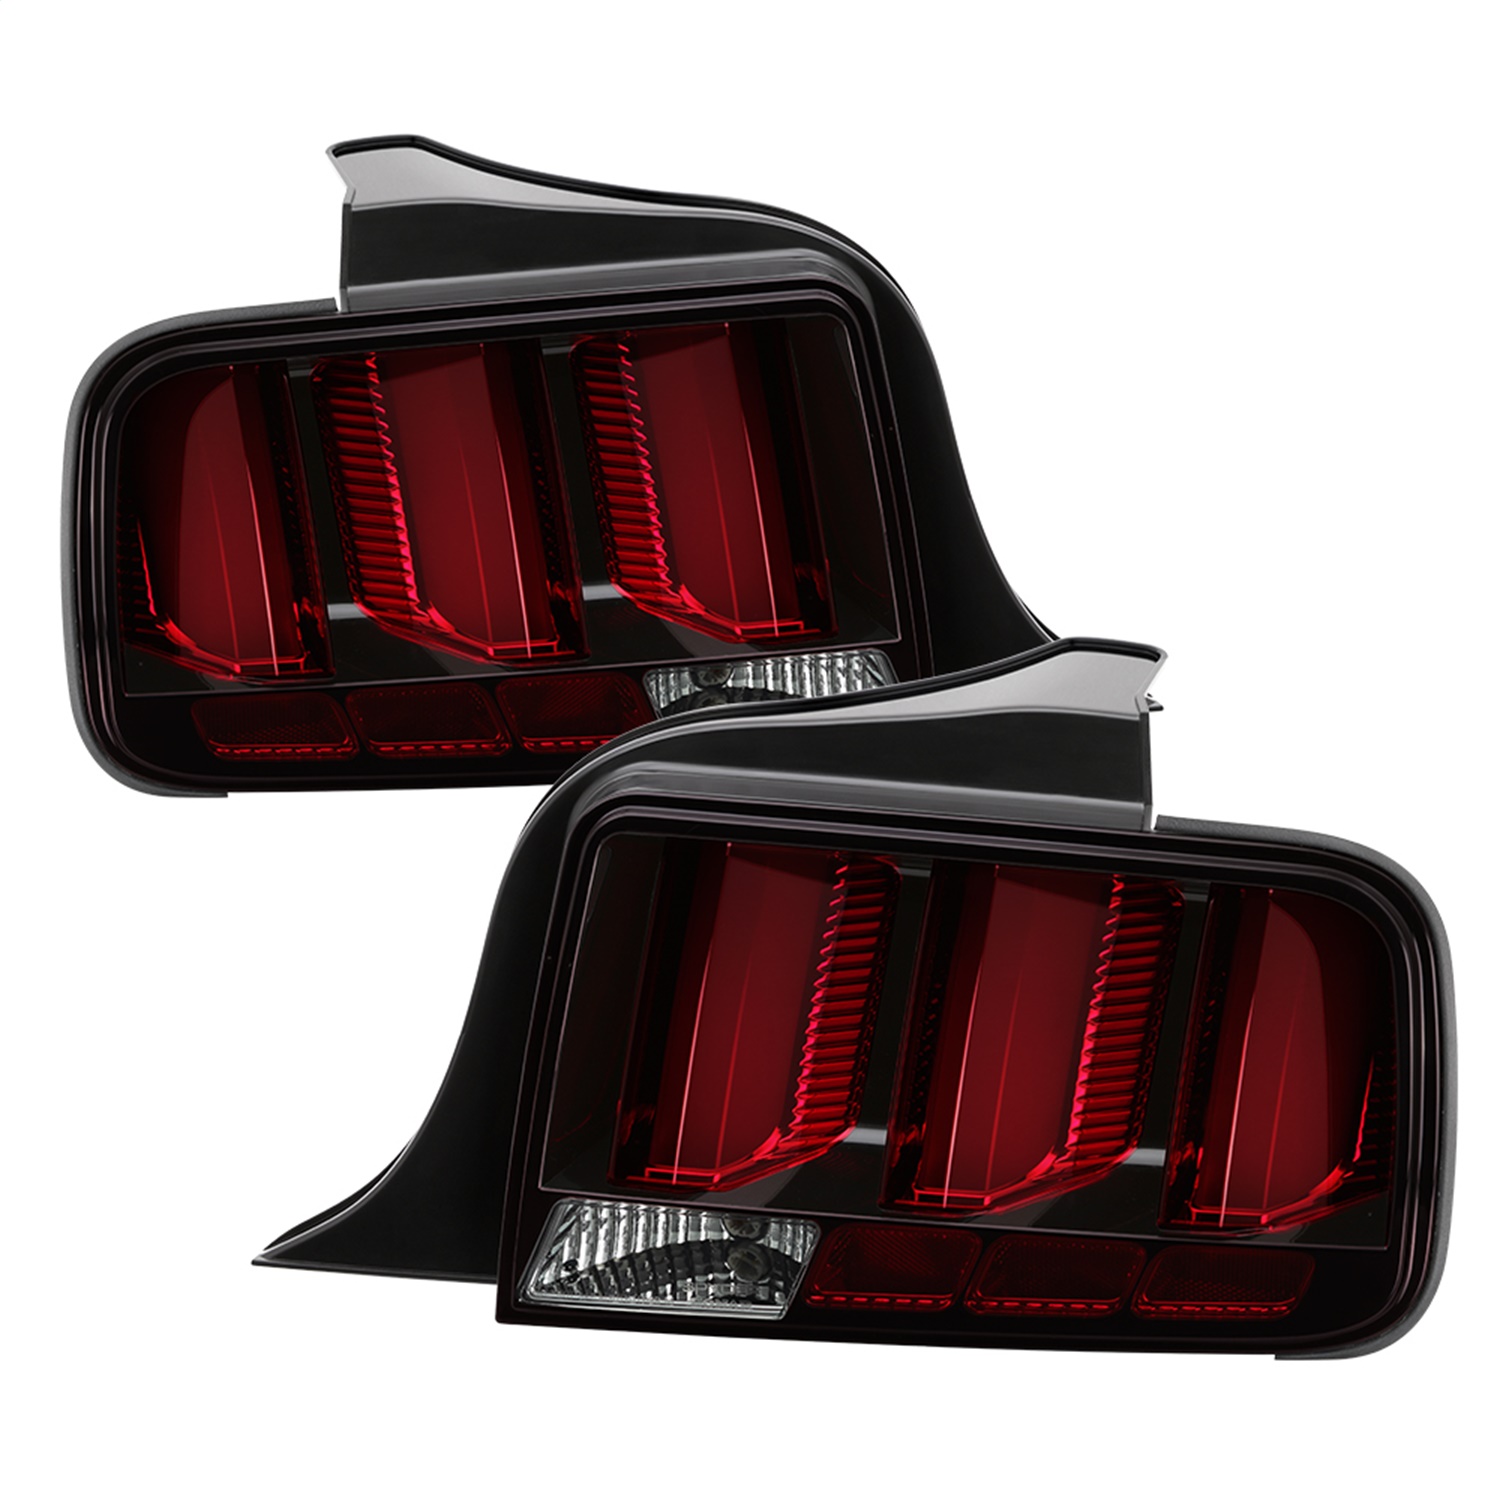 Spyder Auto 5086716 LED Tail Lights Fits 05-09 Mustang